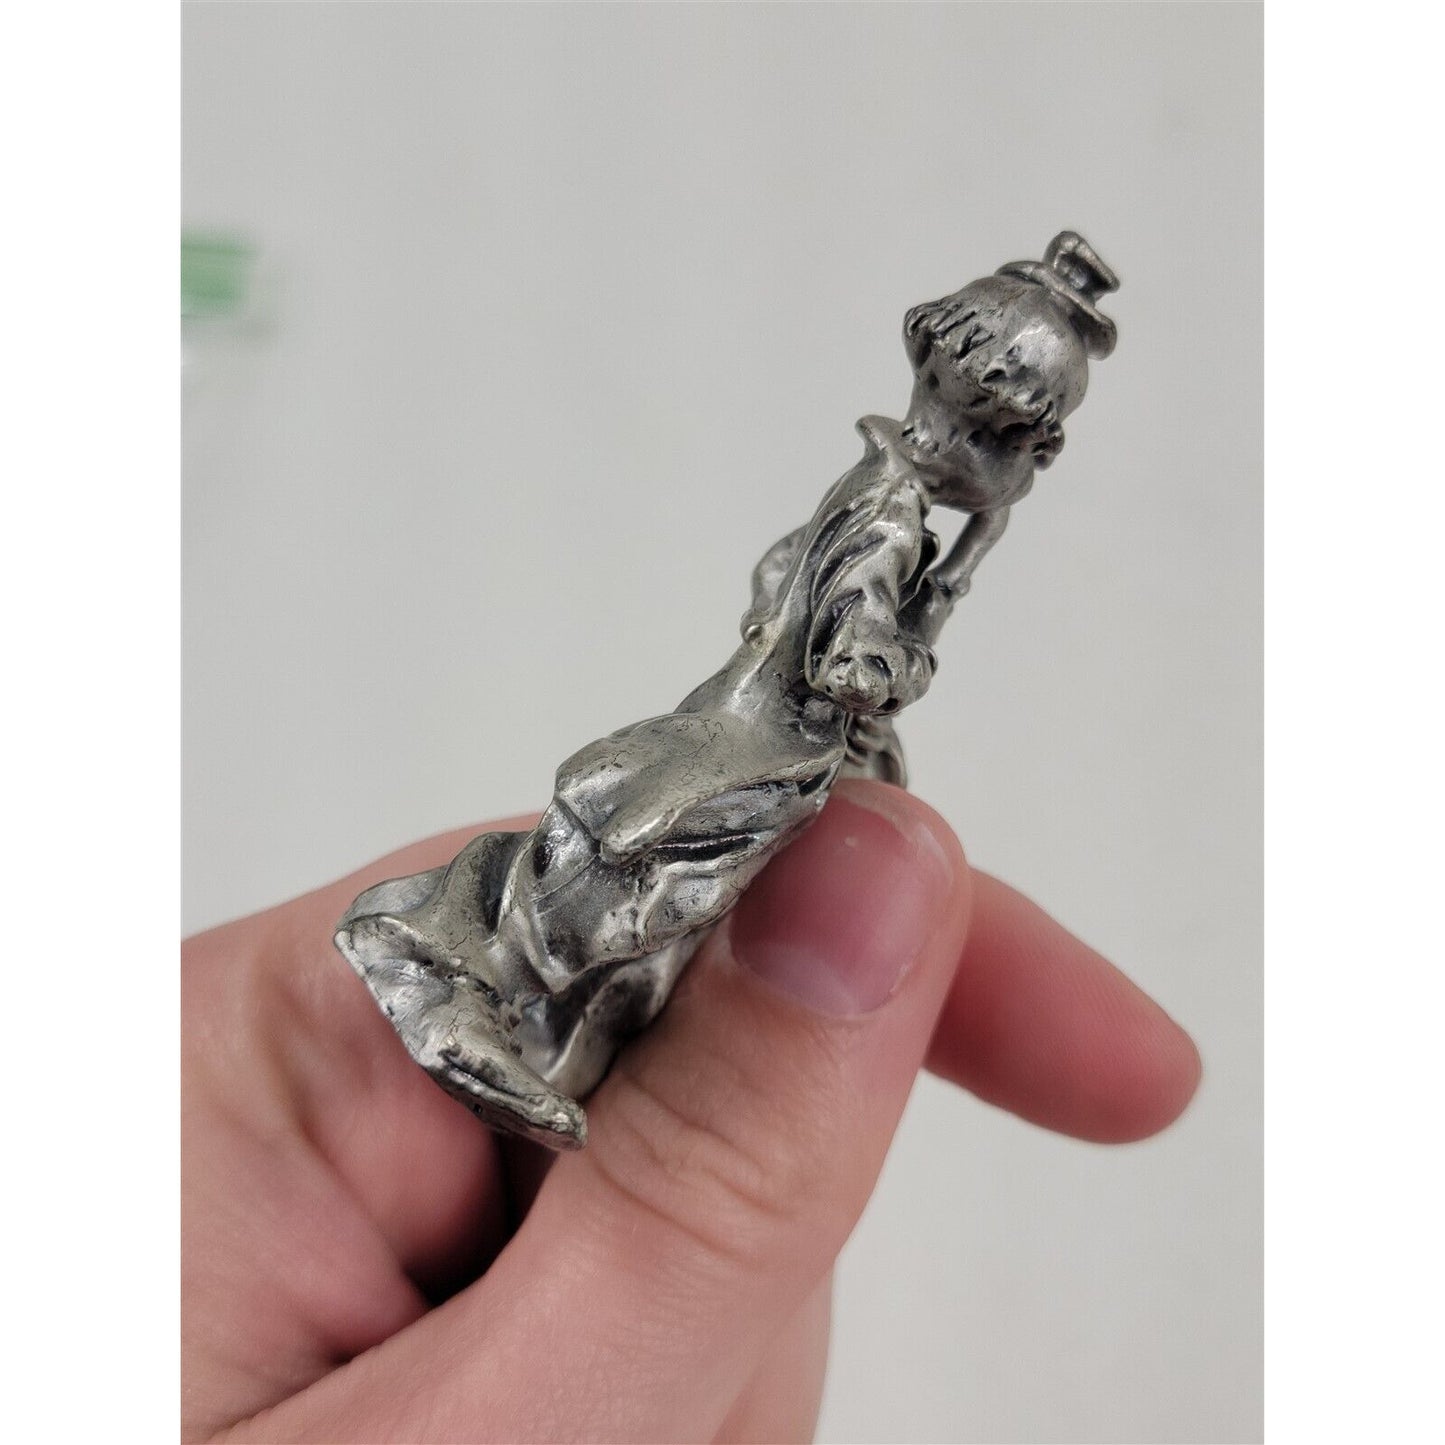 Vintage Solid Pewter Hobo Musical Clown Playing a Saxophone Instrument